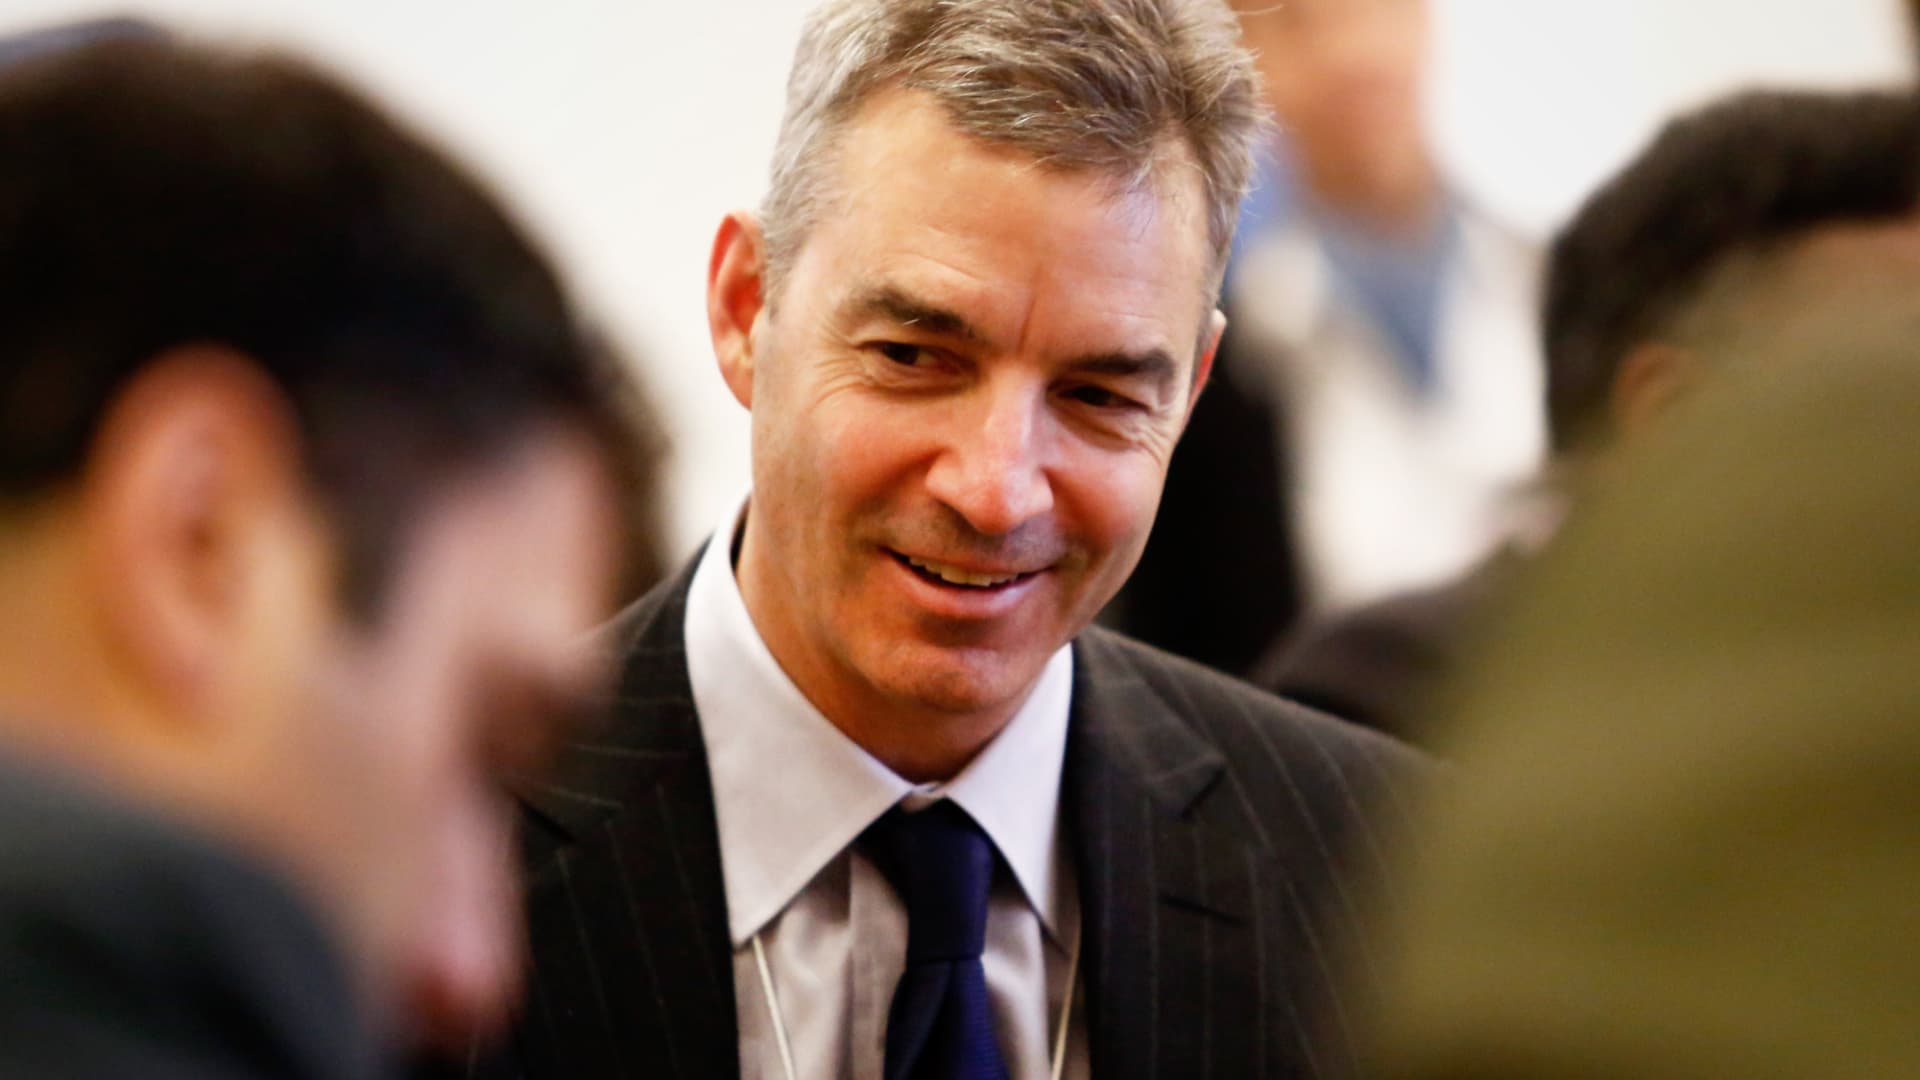 Dan Loeb’s Third Point builds stake in Colgate, sees value in pet food business in potential spinoff